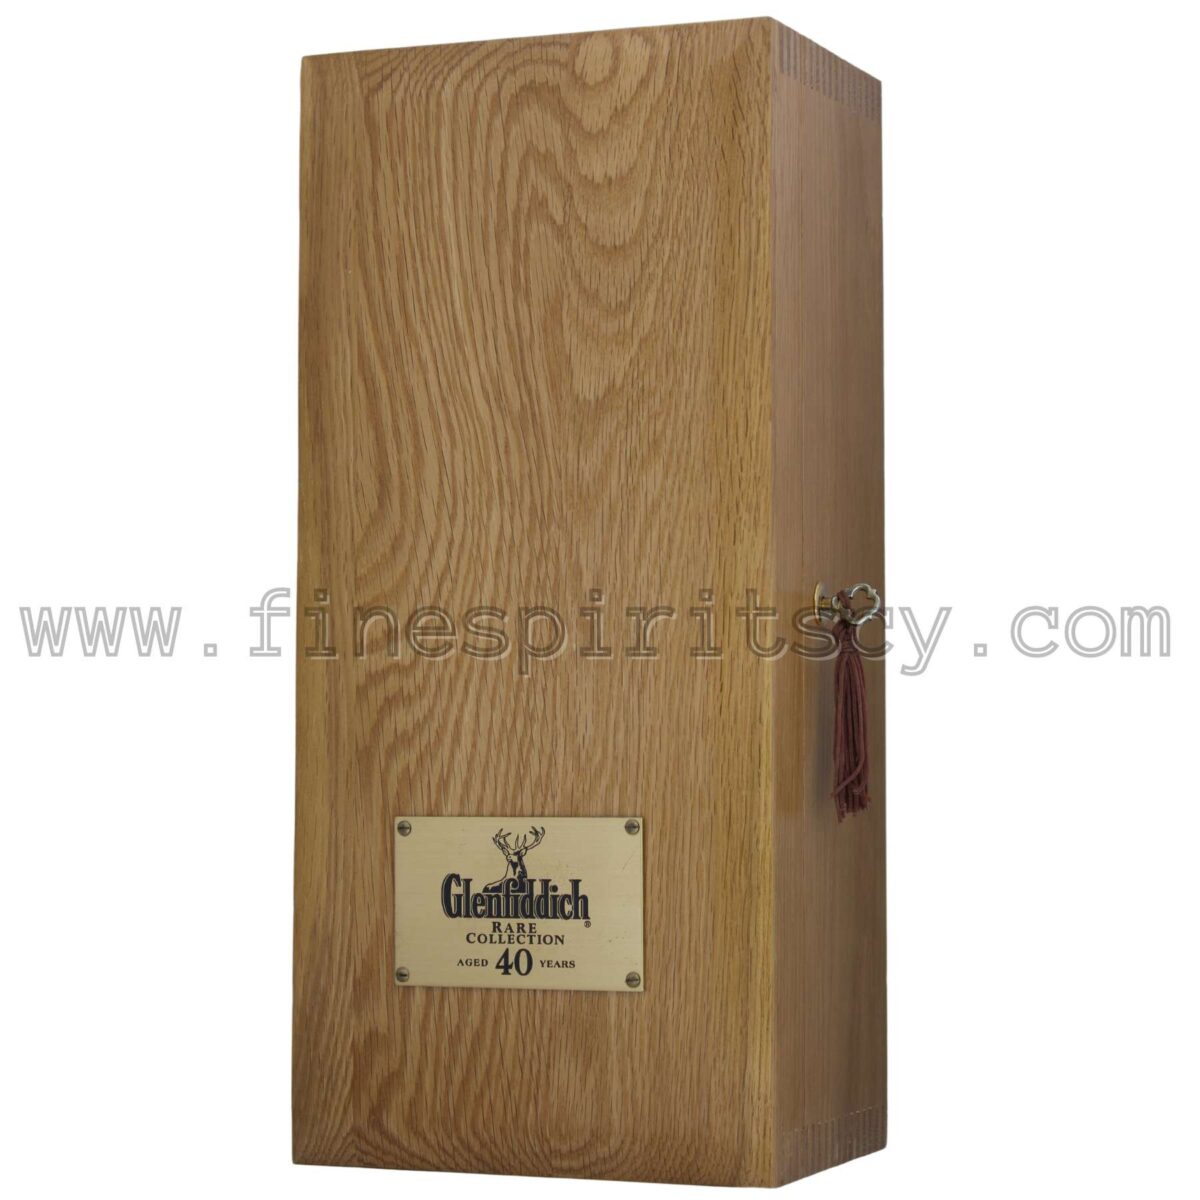 Glenfiddich 40 Y/O Price Cyprus Bottle Number 150 of 500 2007 Online Whisky CY